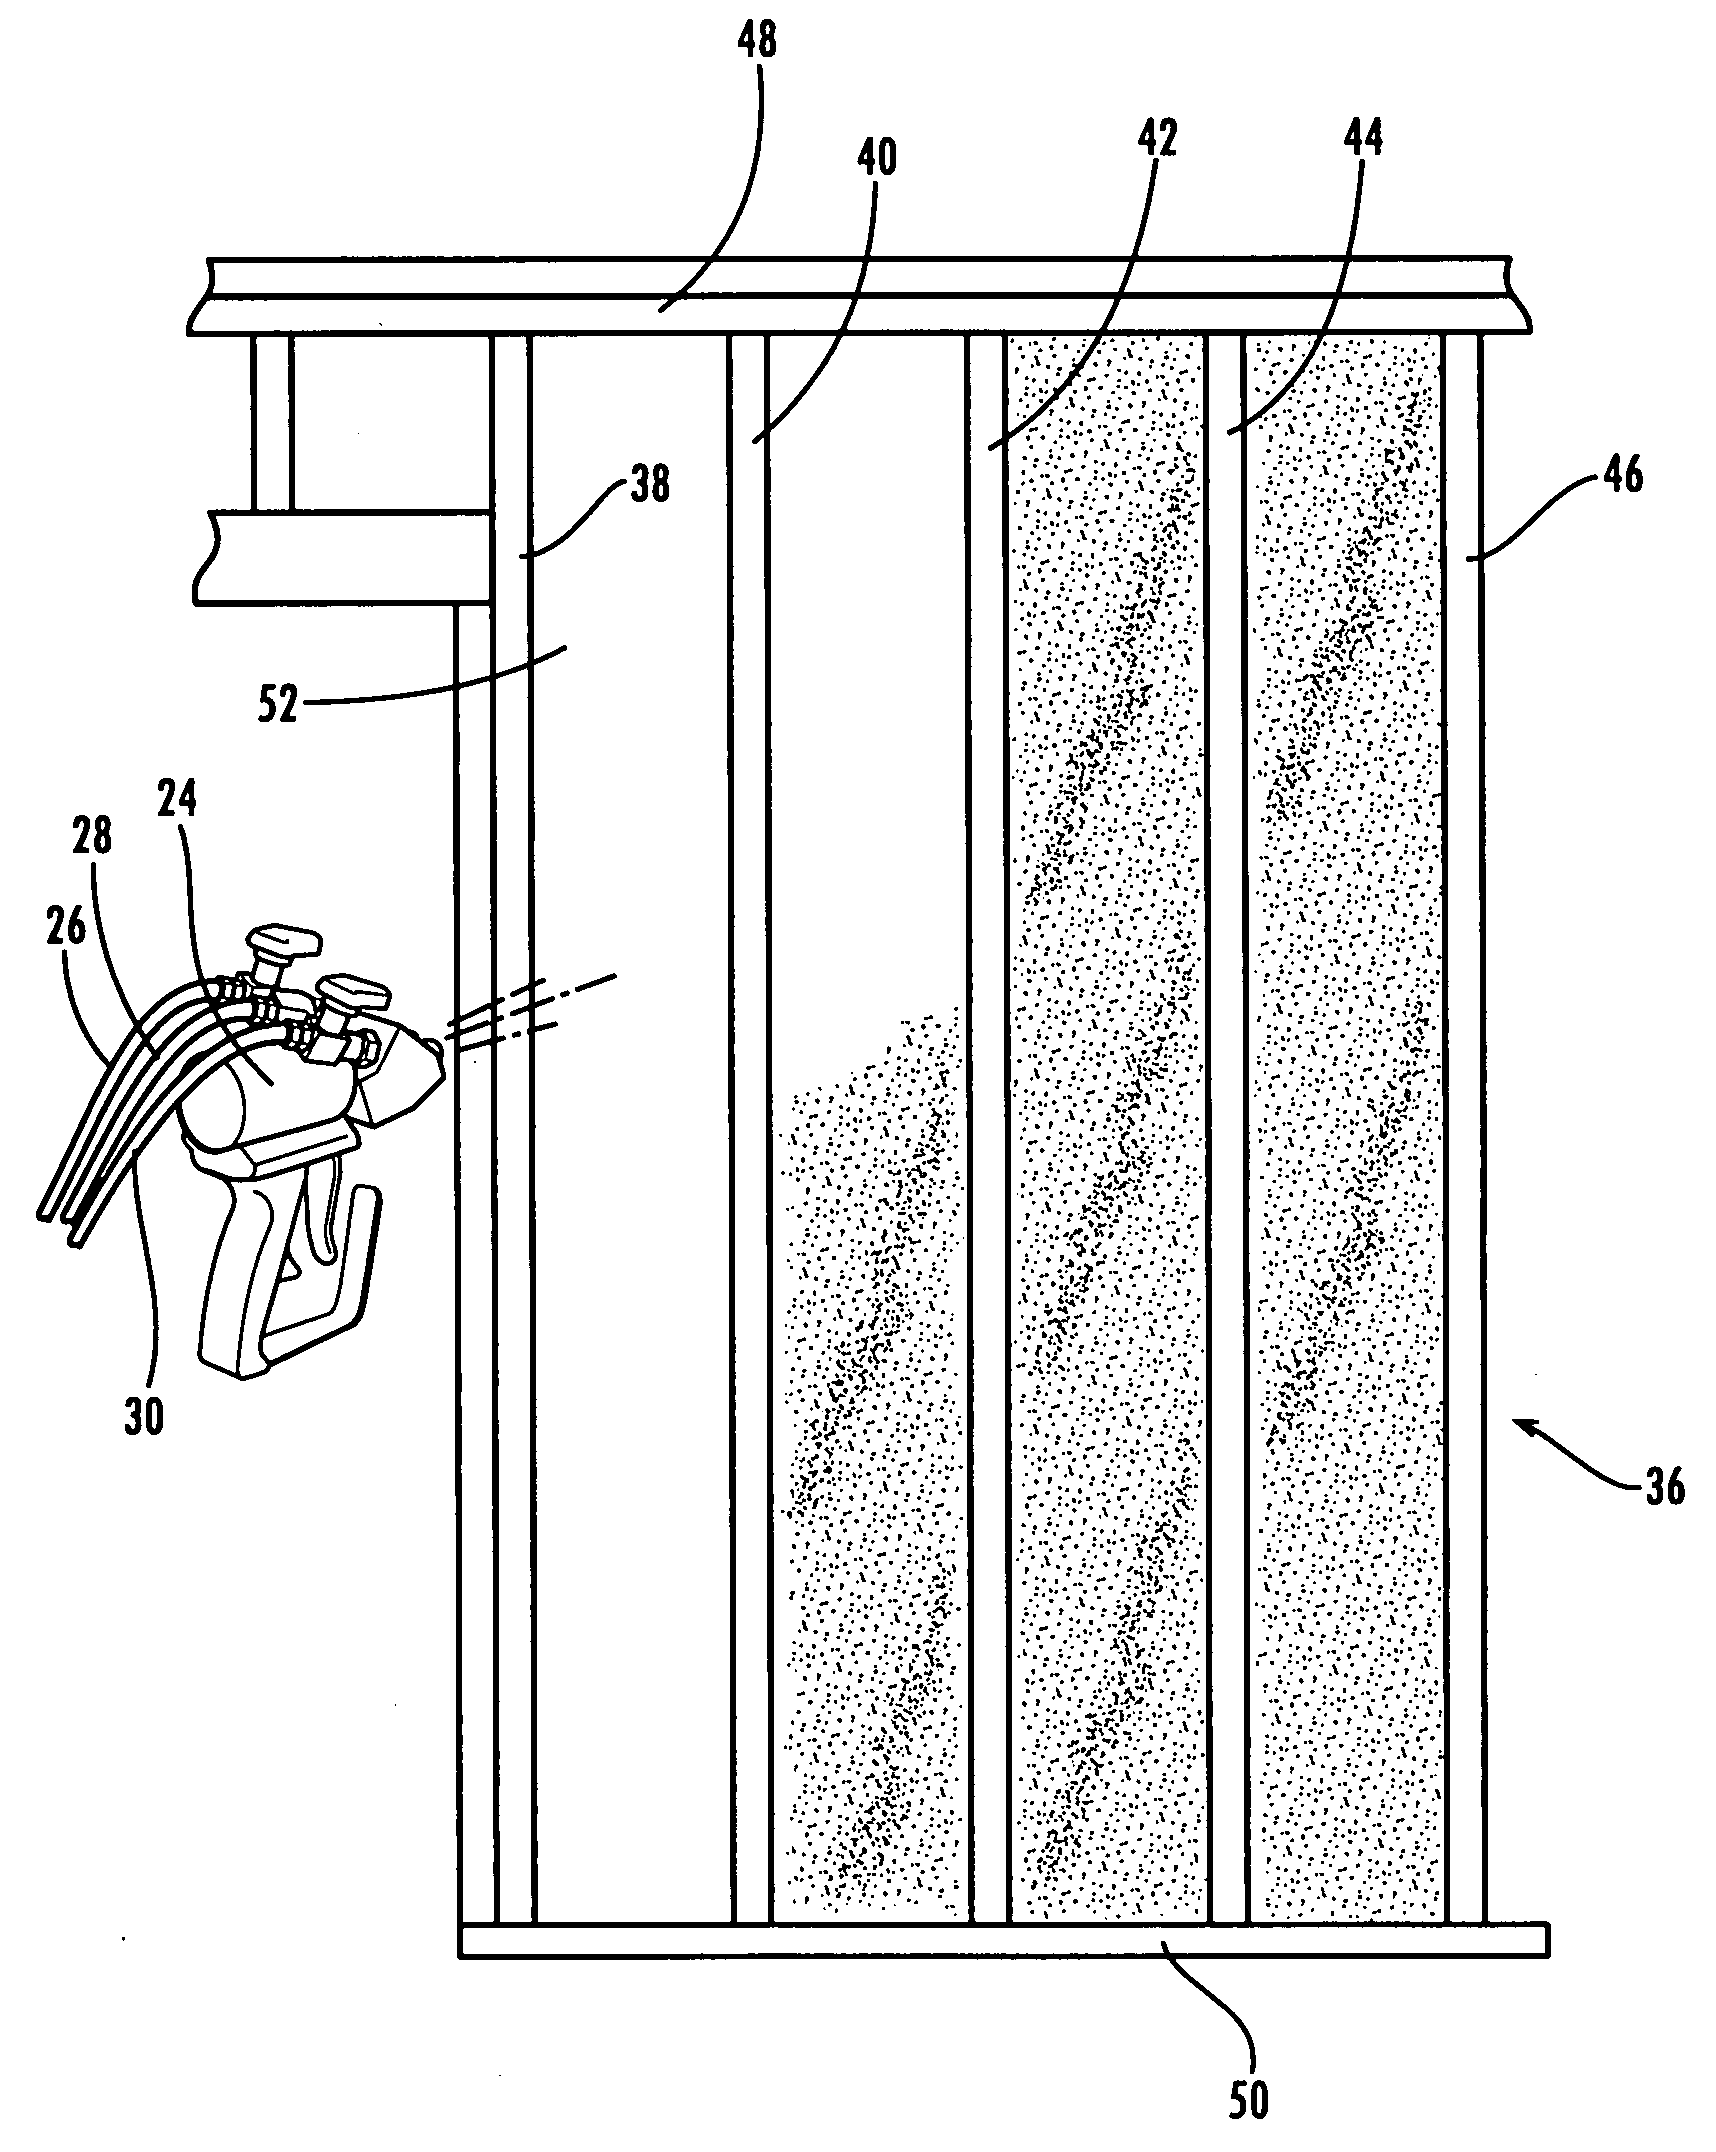 Latex foam insulation and method of making and using same